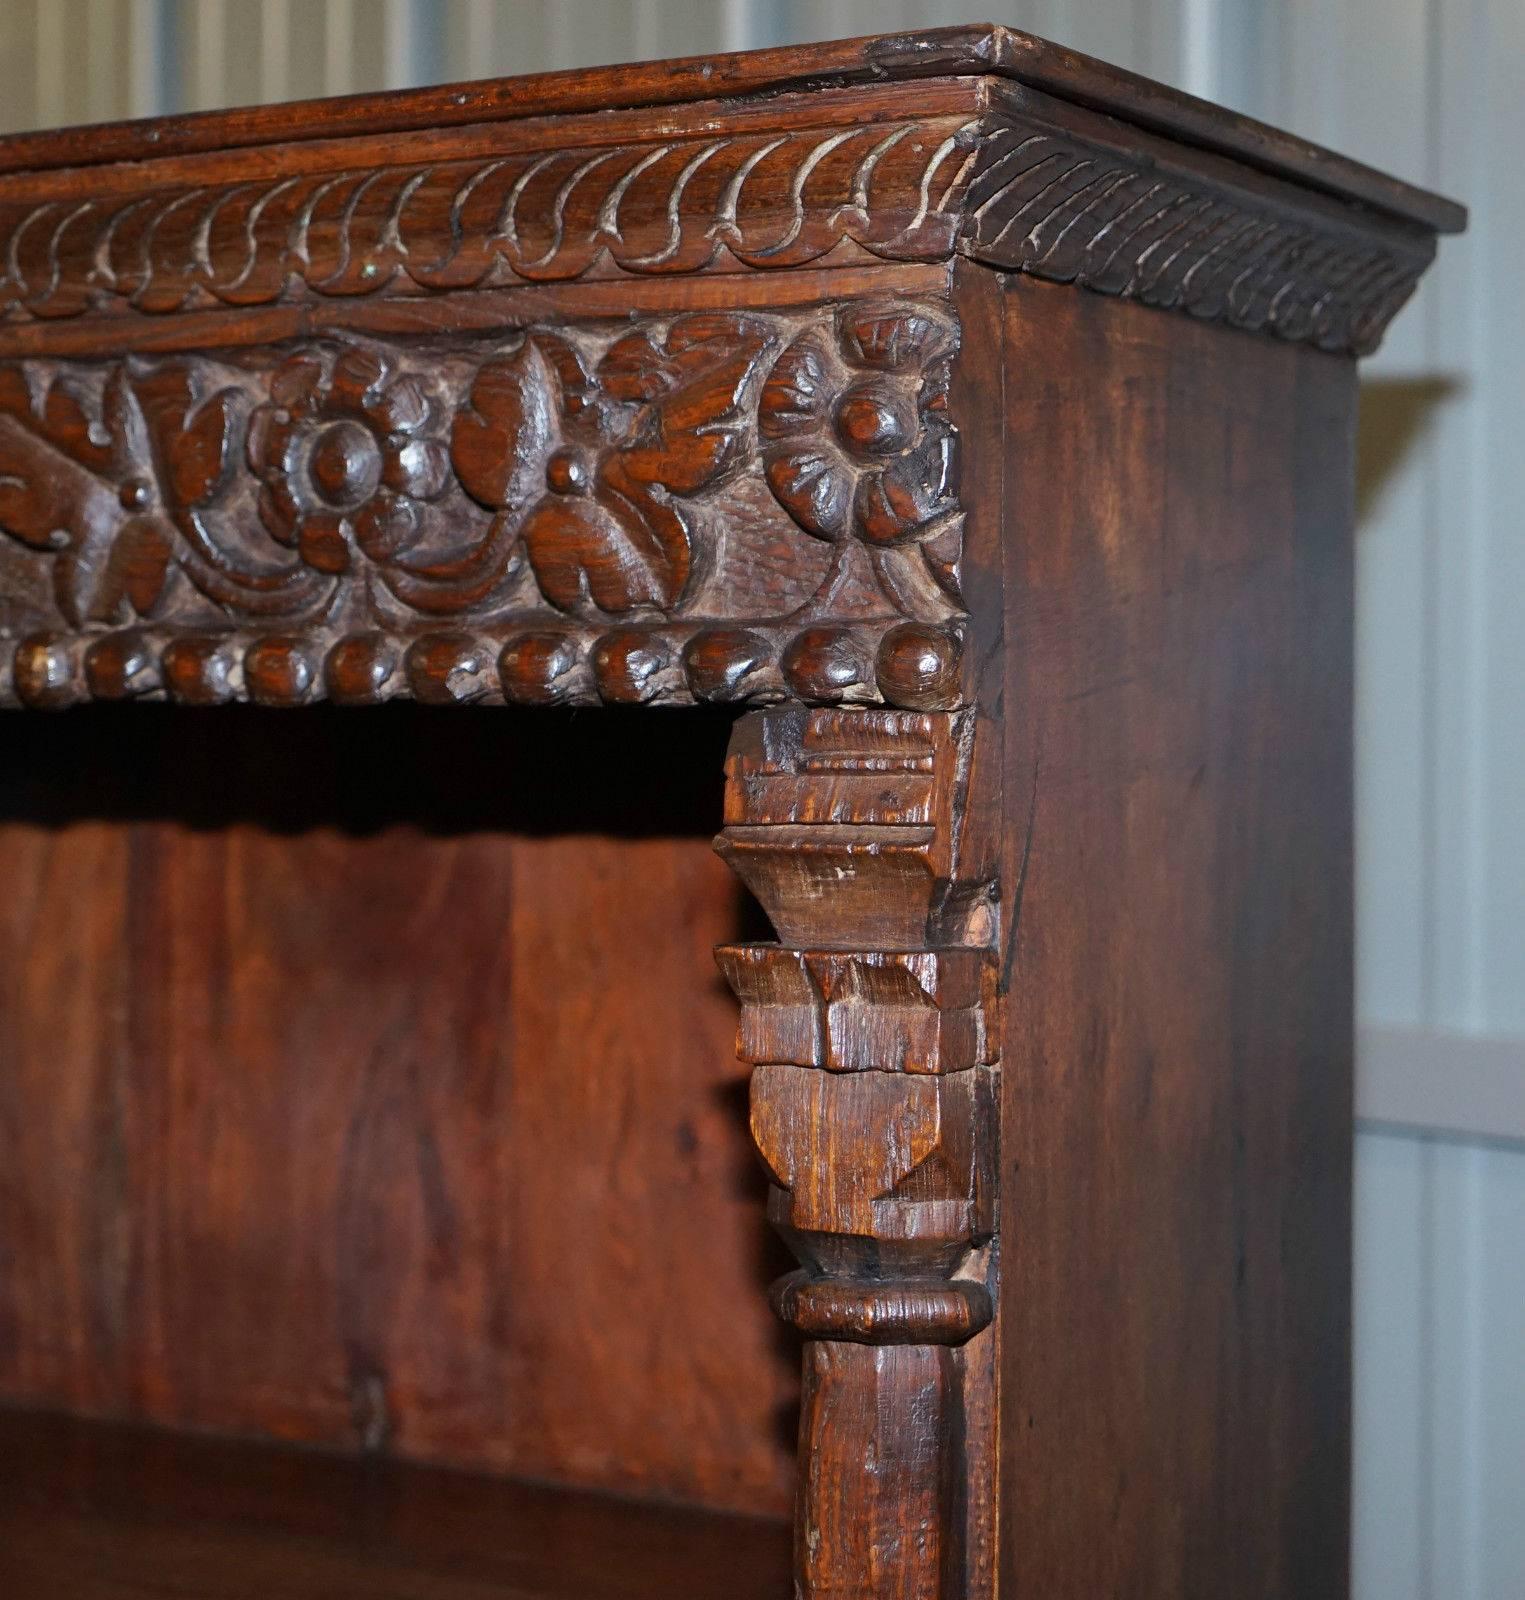 Jacobean Solid Hand-Carved Teak Wood Bookcase, Extremely Heavy and Solid Well Made Piece